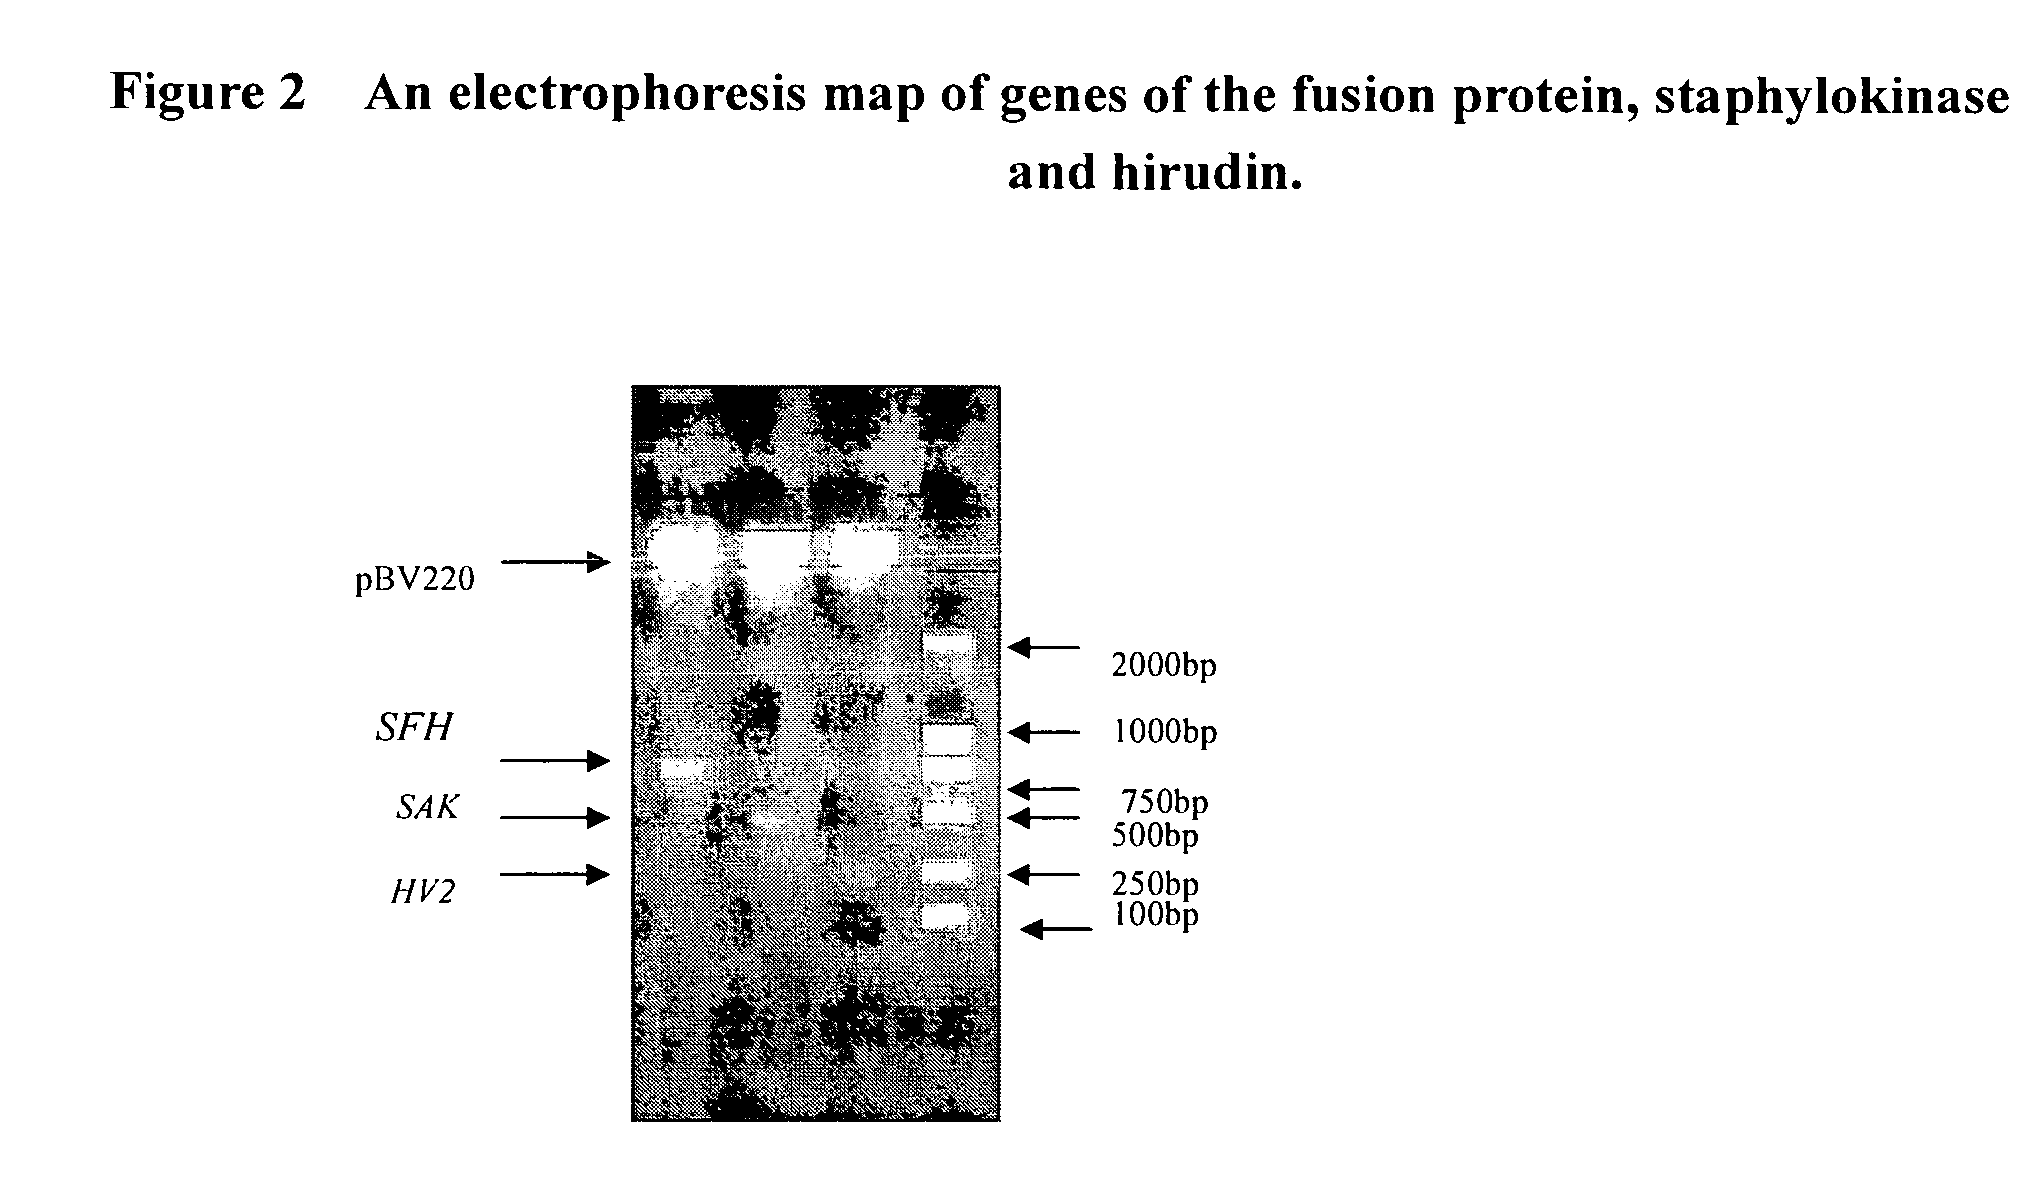 Bifunctional fusion protein with thrombolytic and anticoagulant activities and uses thereof